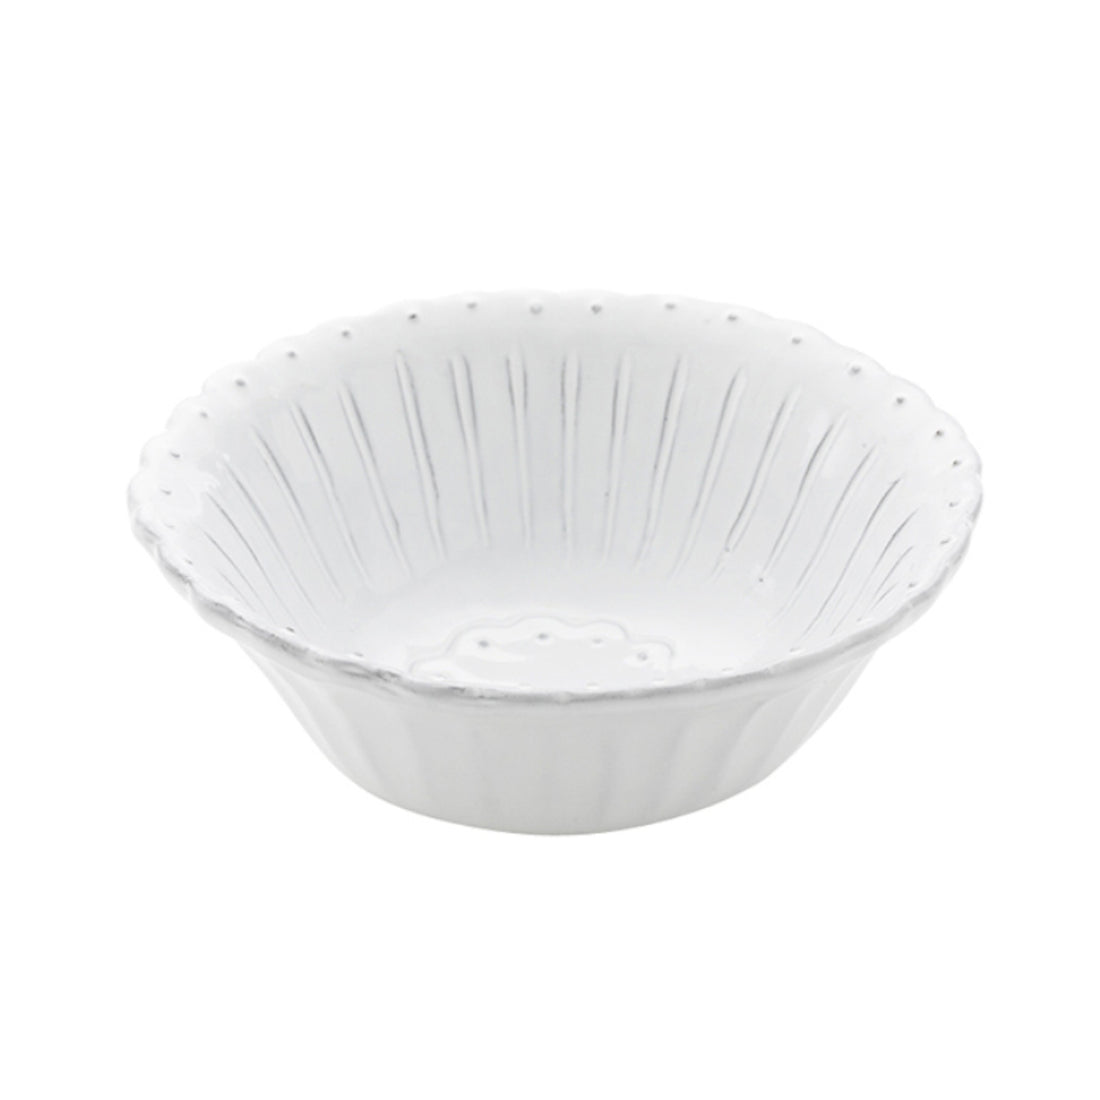 Handmade in Italy, this Arte Italica Bella Bianca Beaded Cereal Bowl features a fluted exterior design on a white background.